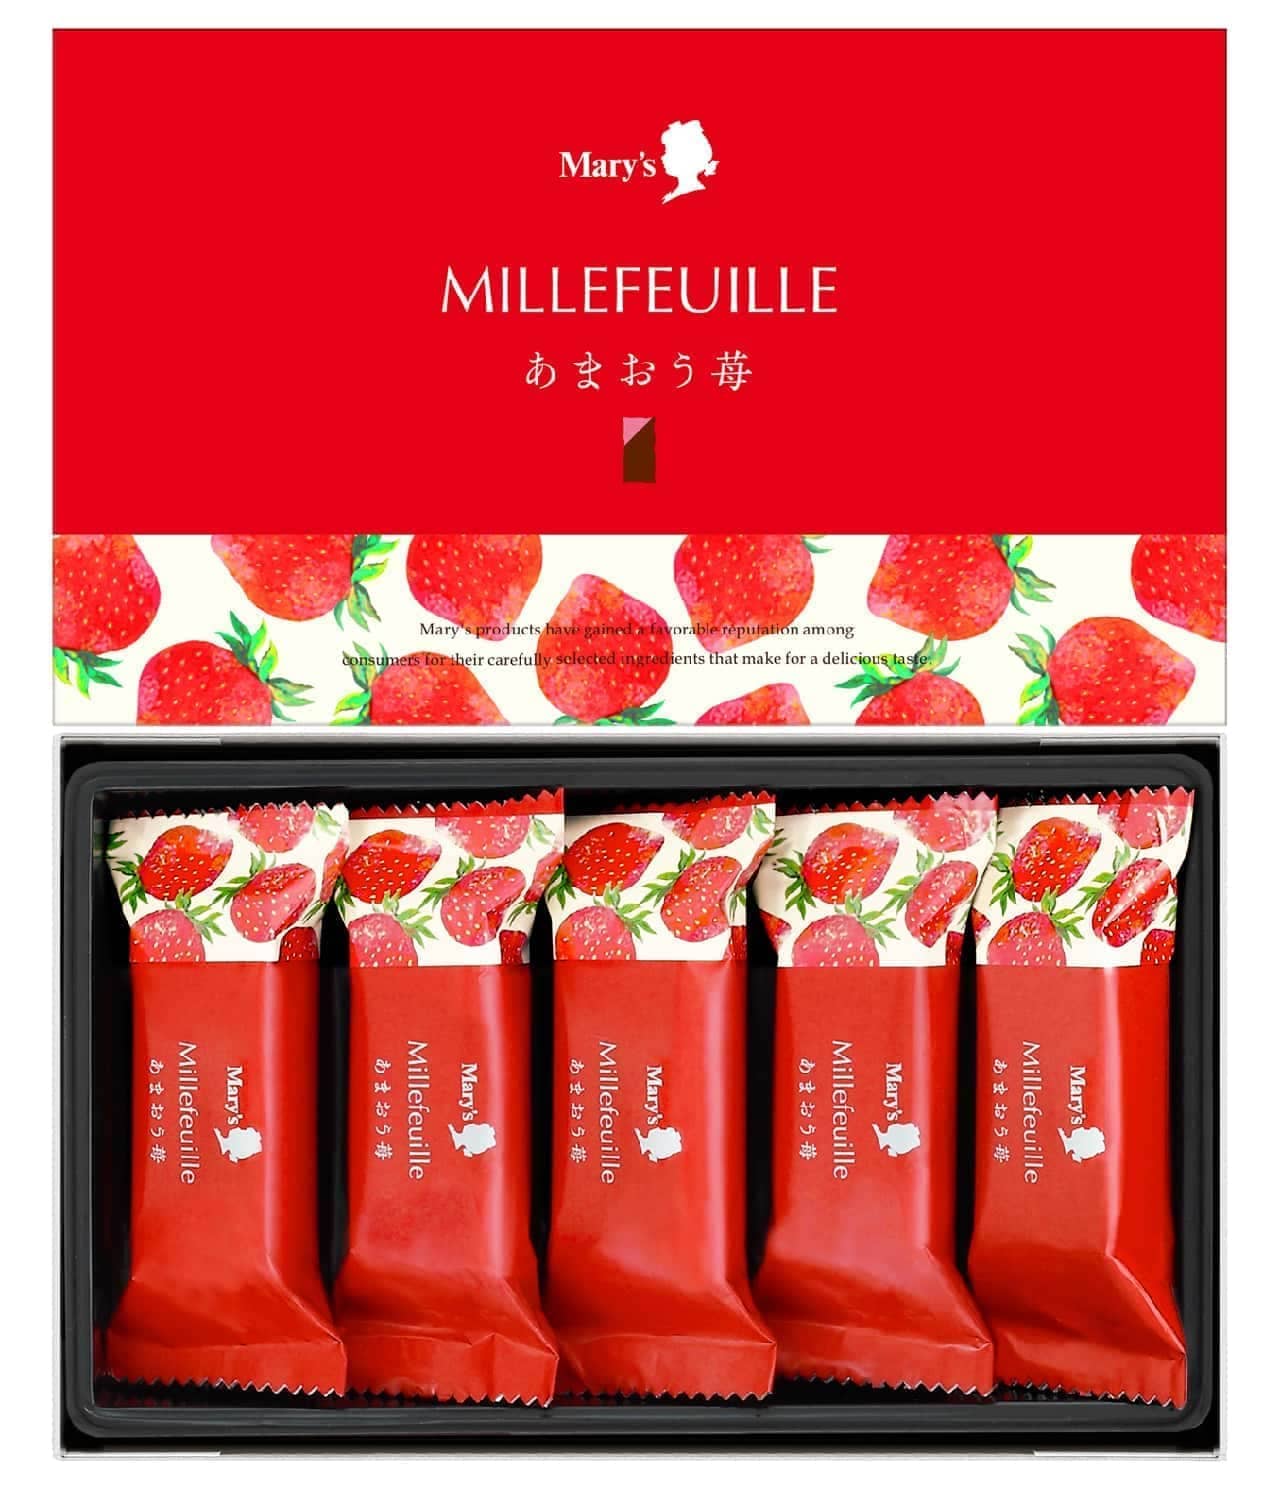 Mary chocolate "Mille-feuille (Amaou strawberry)"